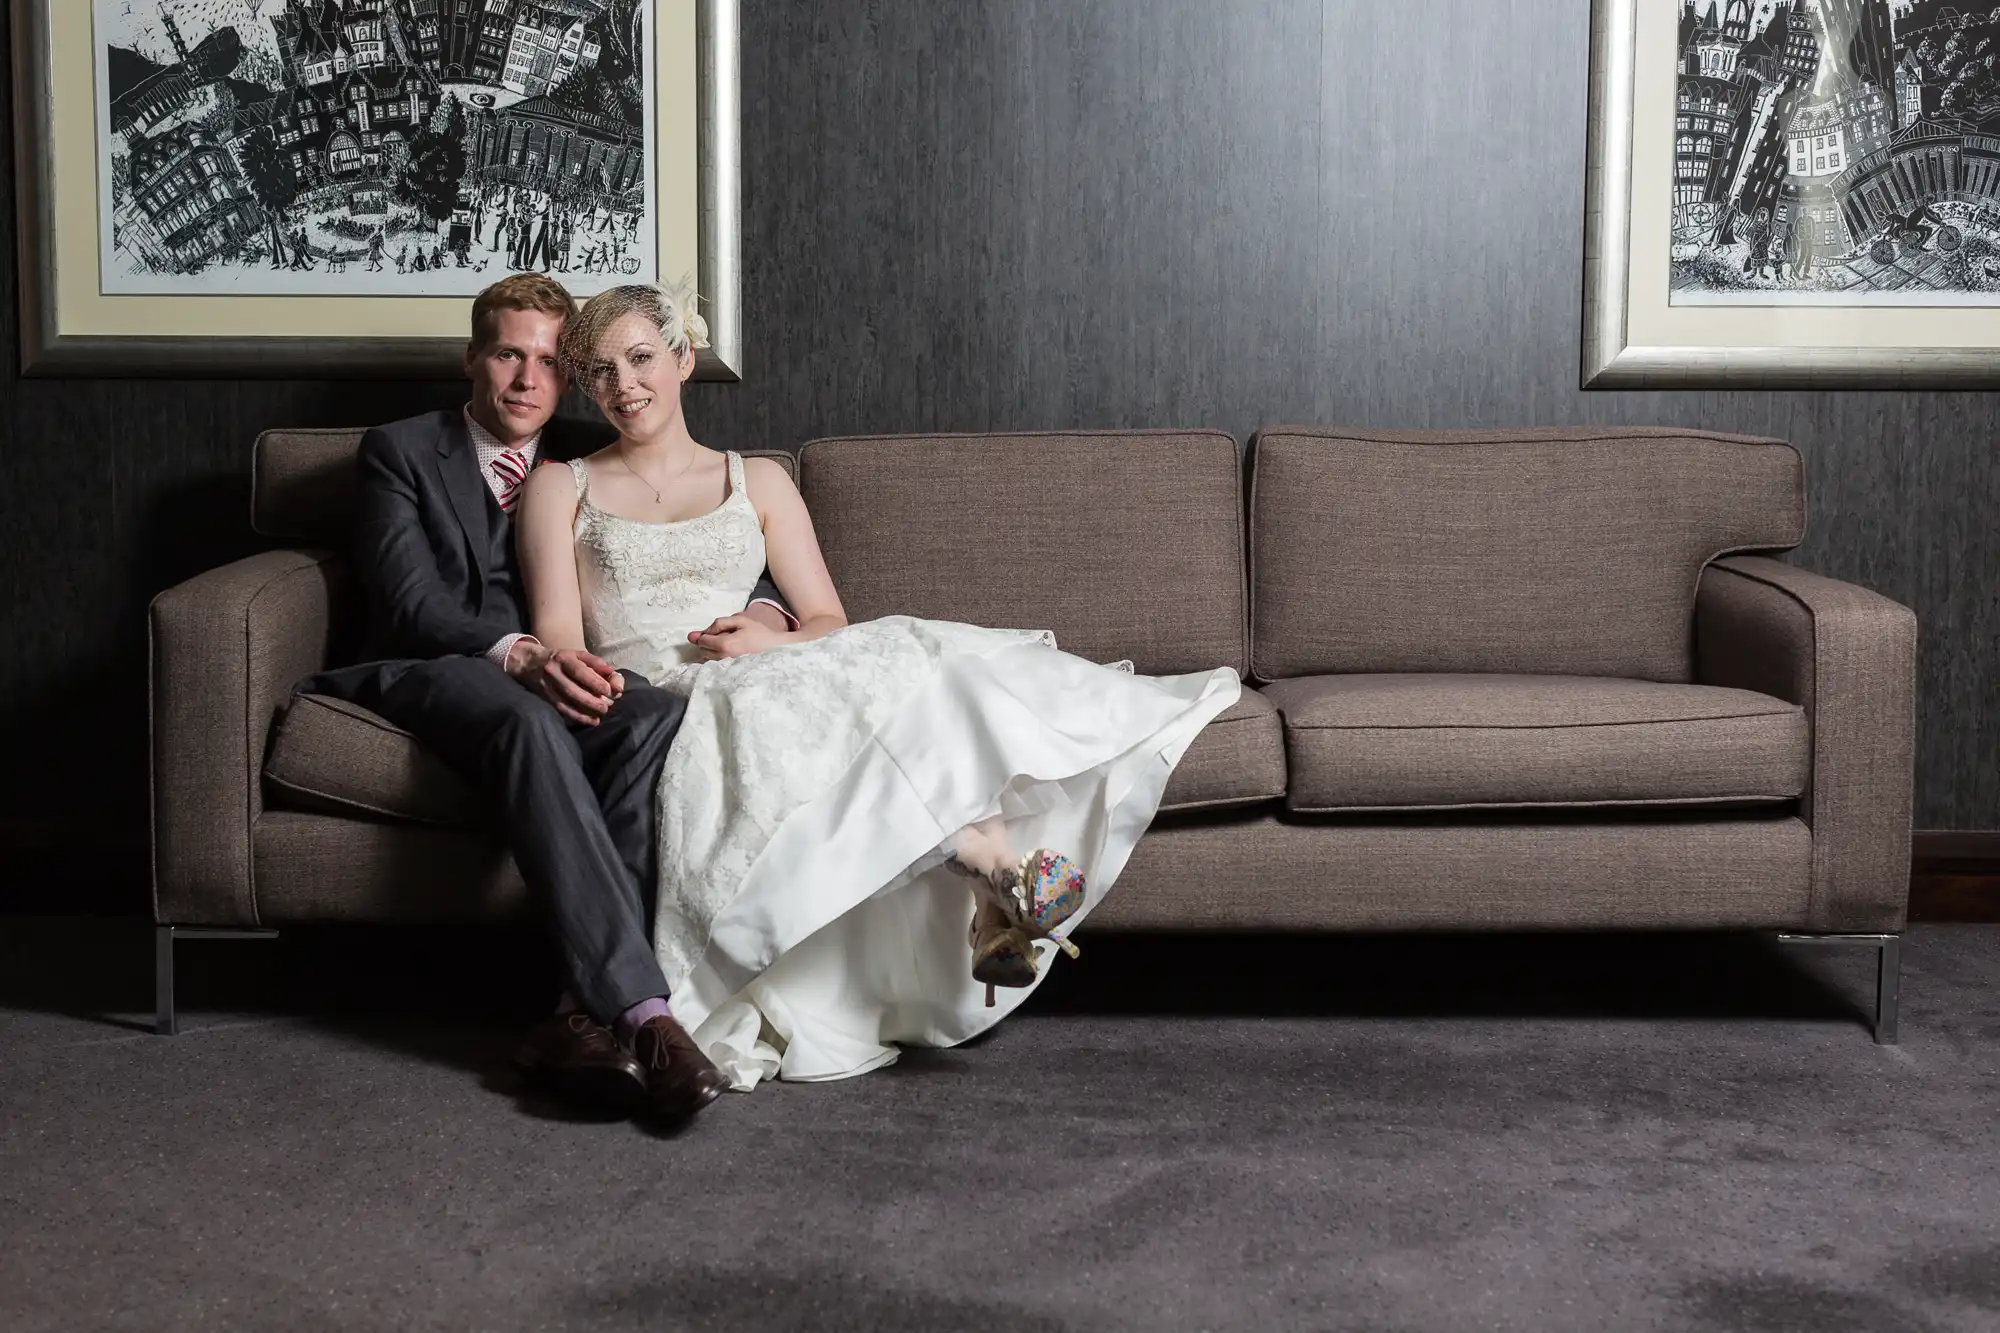 A bride and groom sitting closely on a brown sofa, smiling subtly, in a room with gray walls and framed artwork.